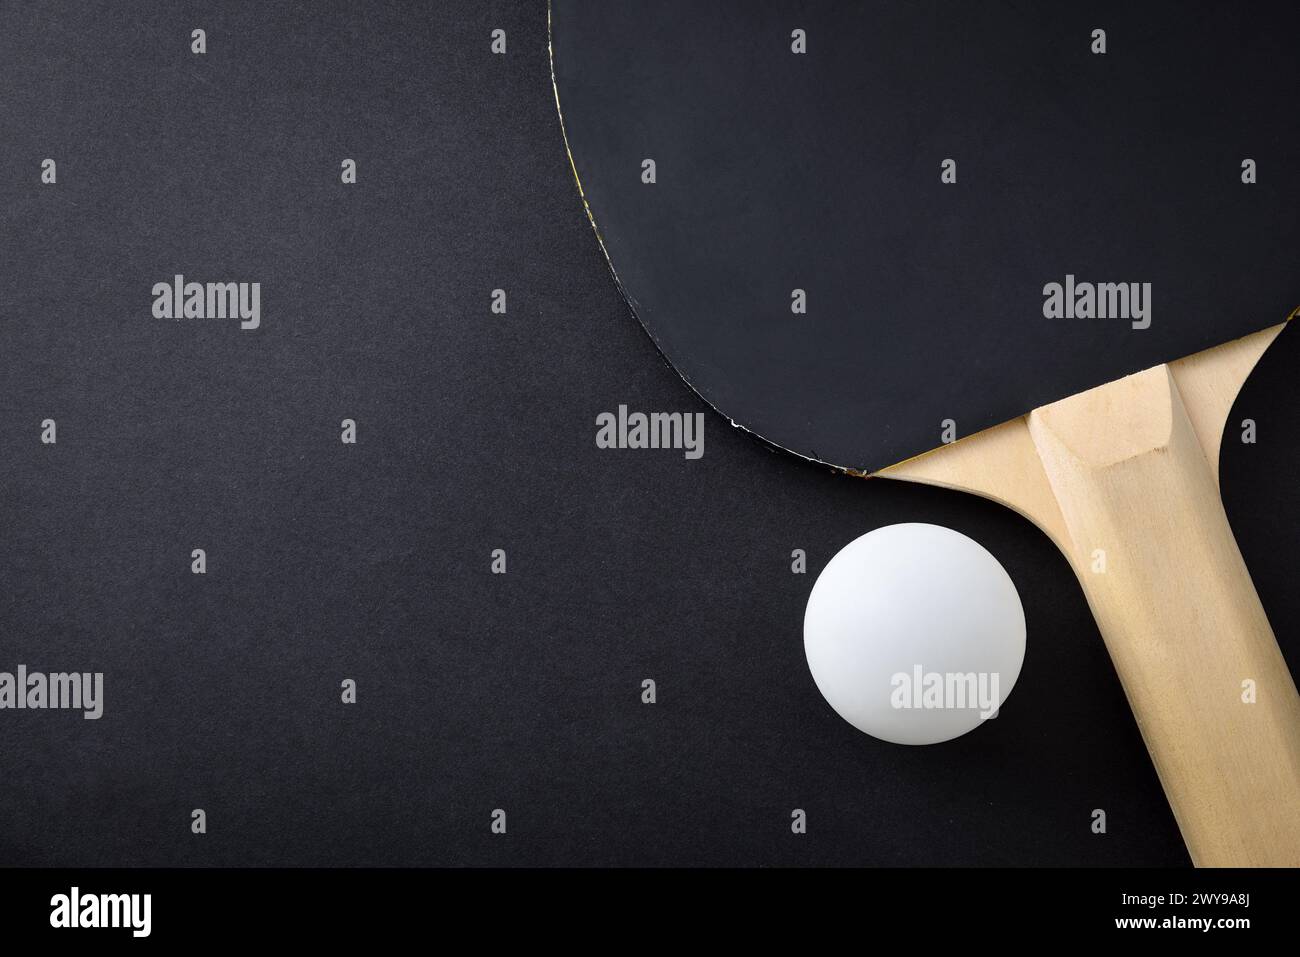 Detail of ping pong paddle with black rubber and white ball on black playing table. Top view. Stock Photo